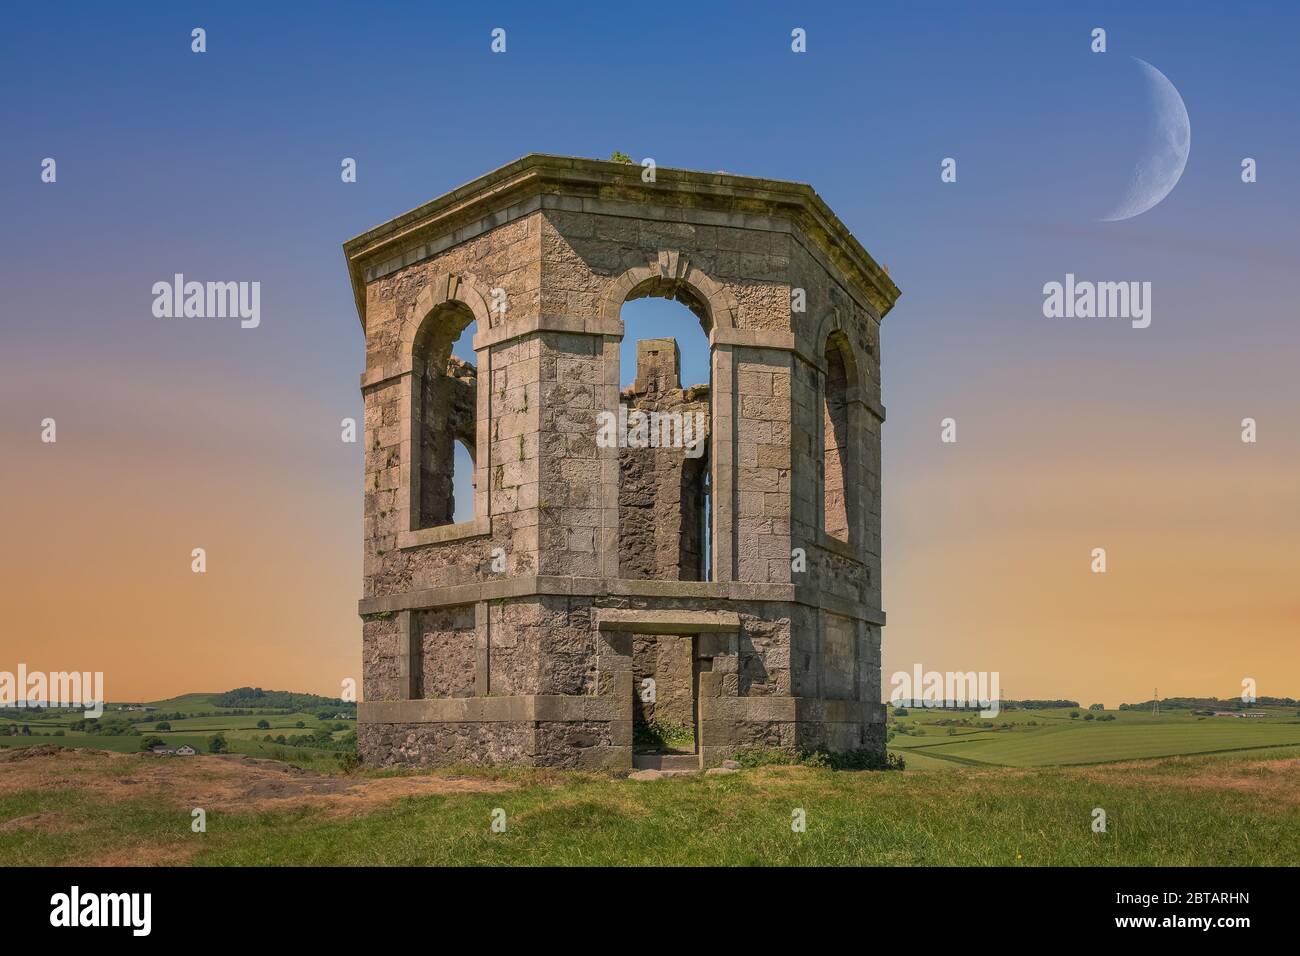 On Kenmuir Hill stands  The Ancient Ruins of Castle Semple Temple that overloks the Renfrewshire Valley in Scotland. Stock Photo